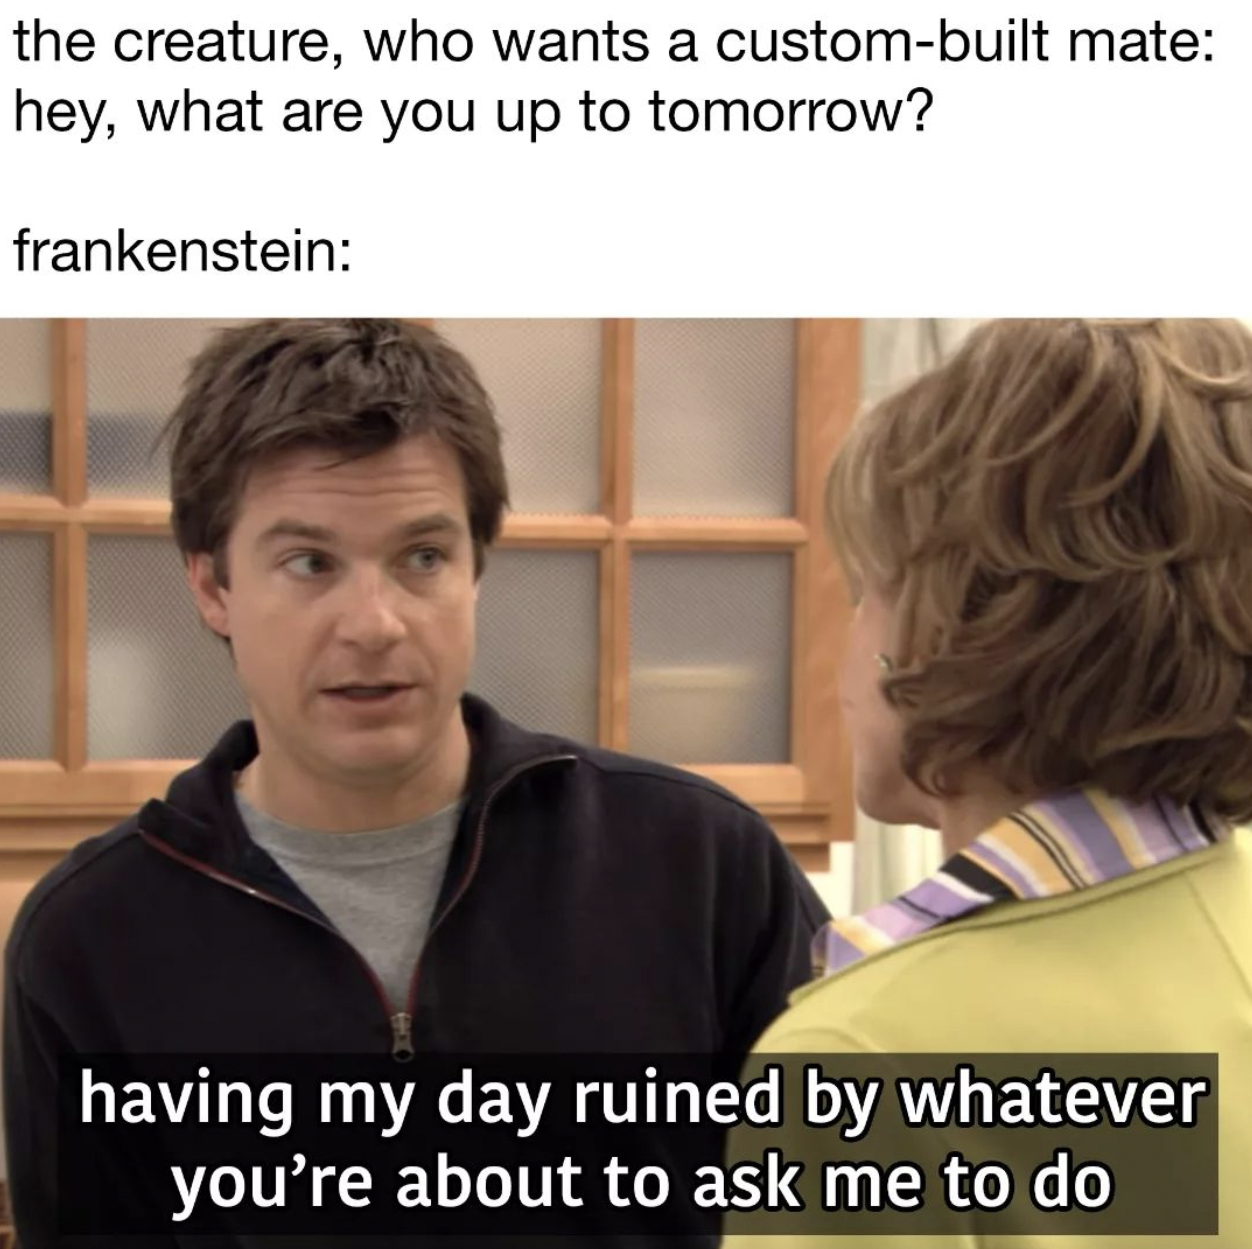 SparkNotes memes - conversation - the creature, who wants a custombuilt mate hey, what are you up to tomorrow? frankenstein having my day ruined by whatever you're about to ask me to do